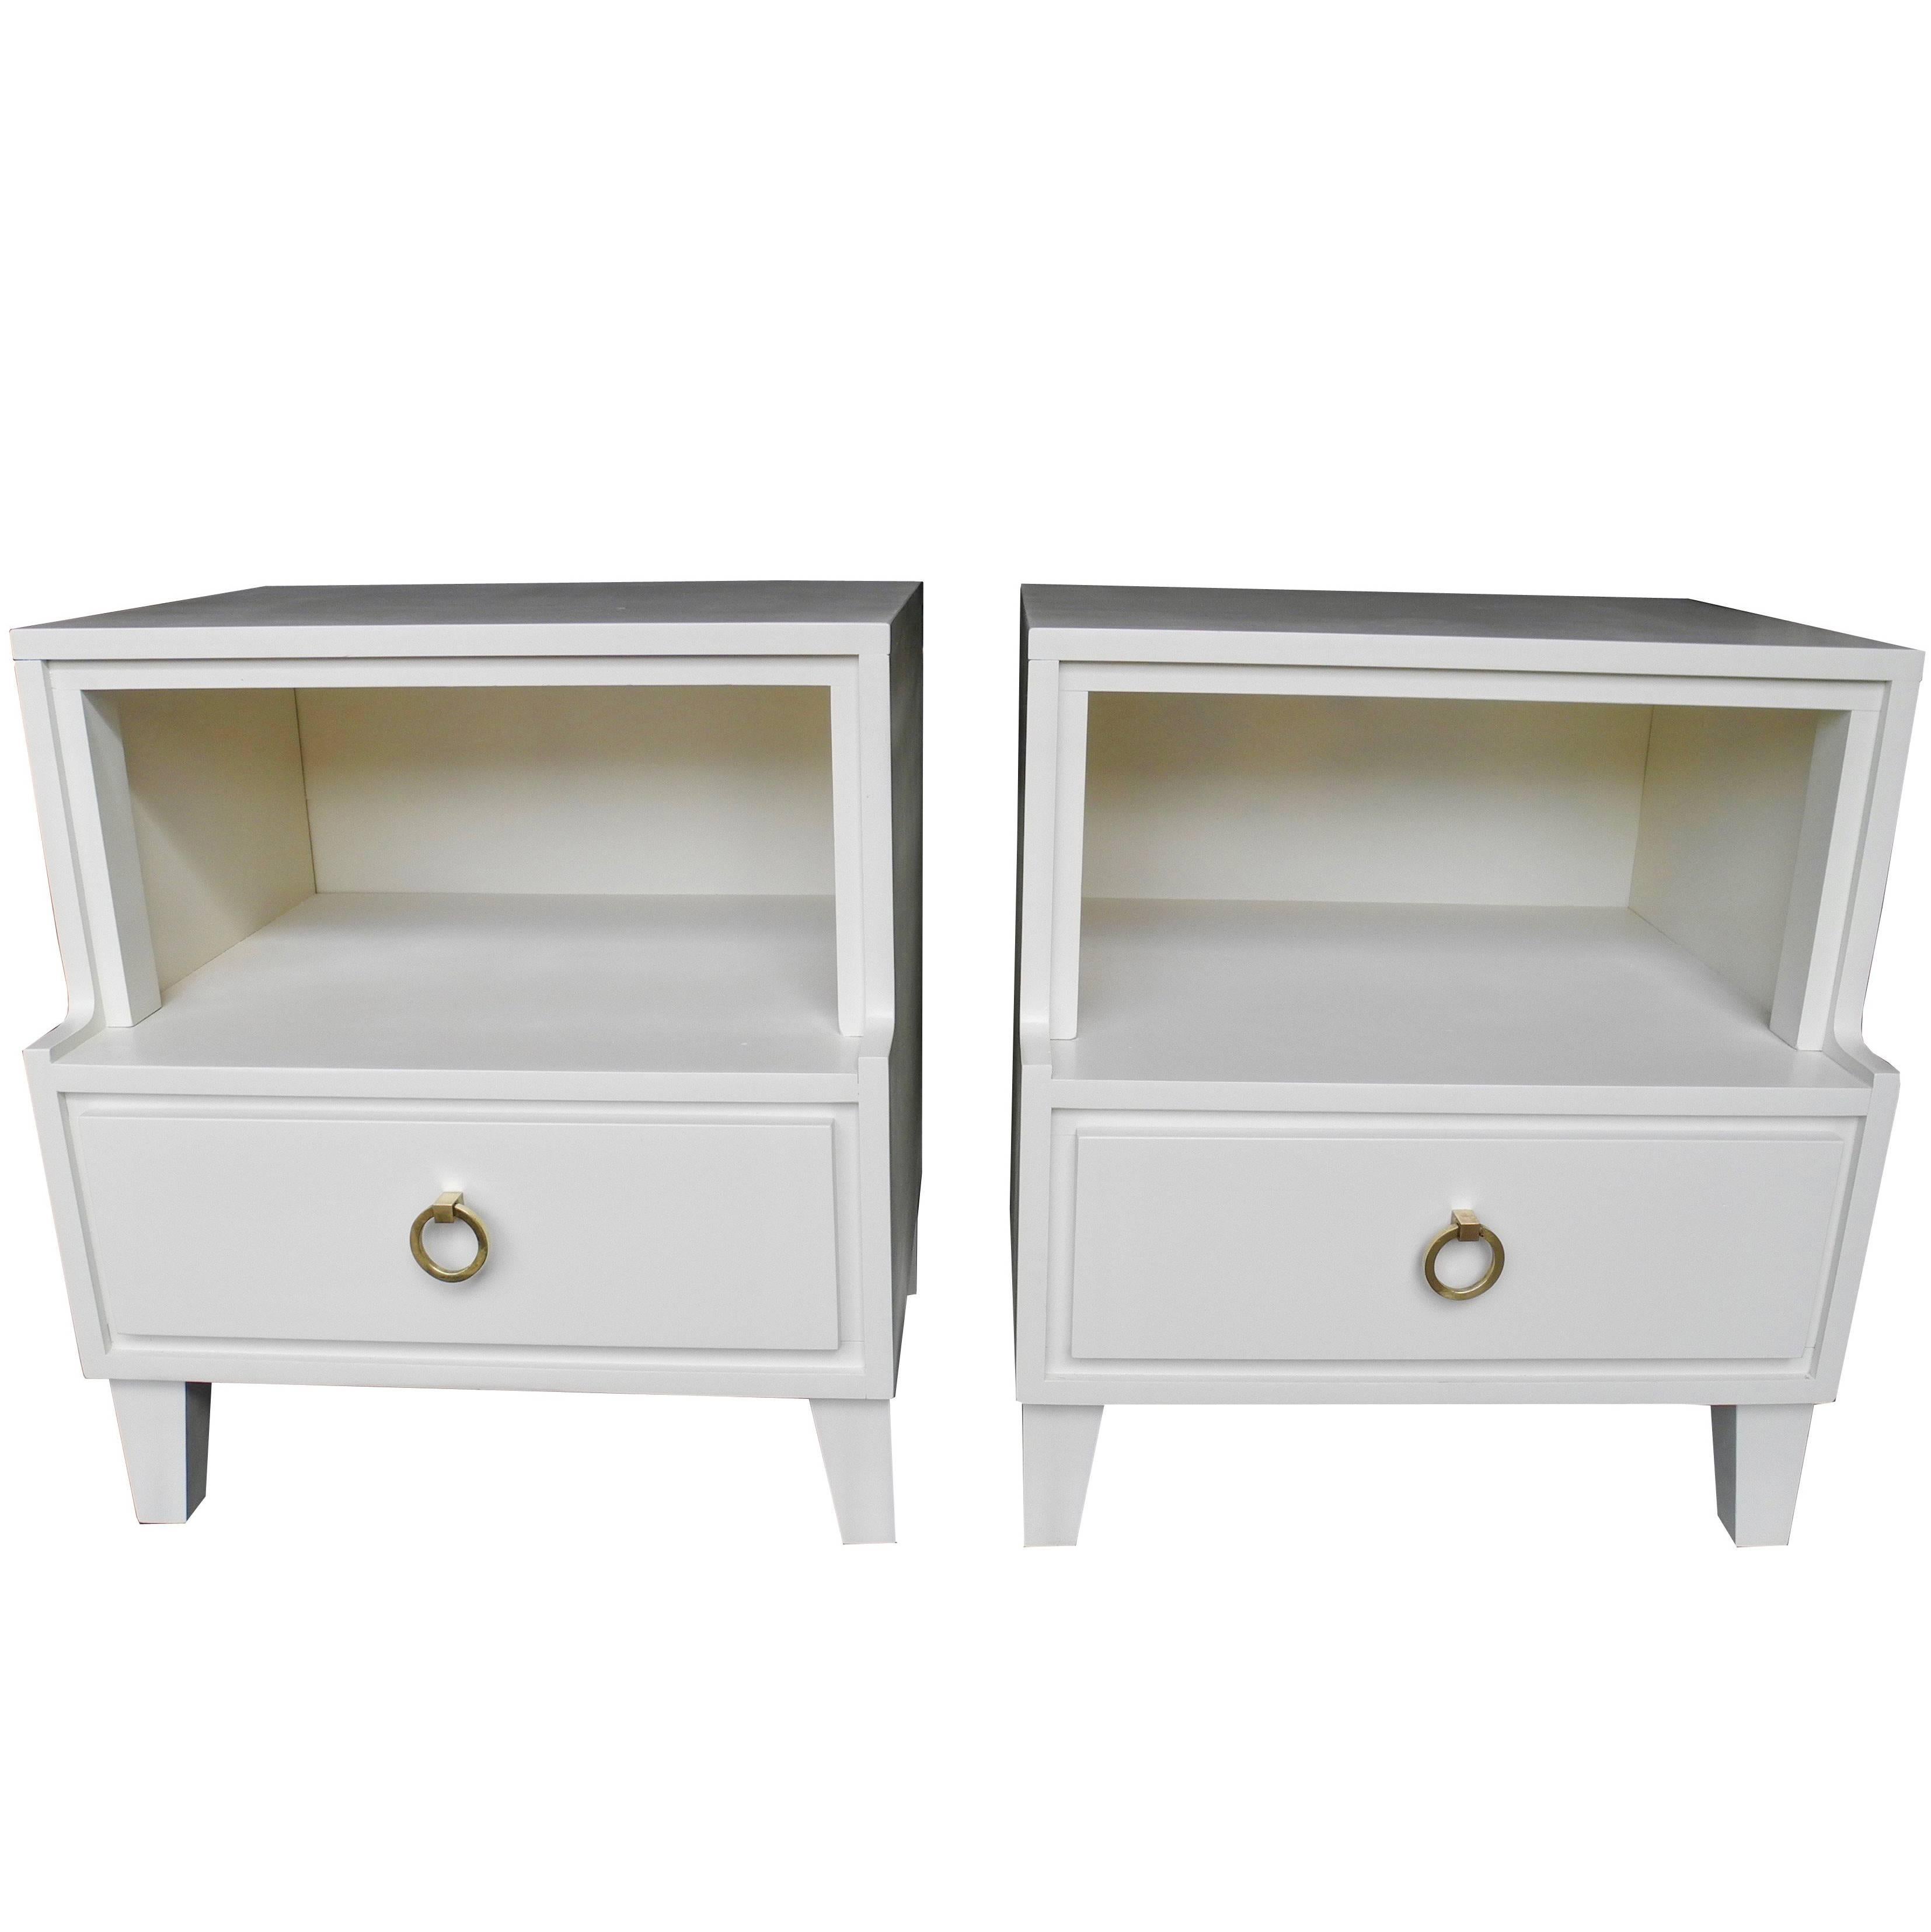 Pair of Mid-Century Modern Nightstands in Linen White by Conant Ball For Sale